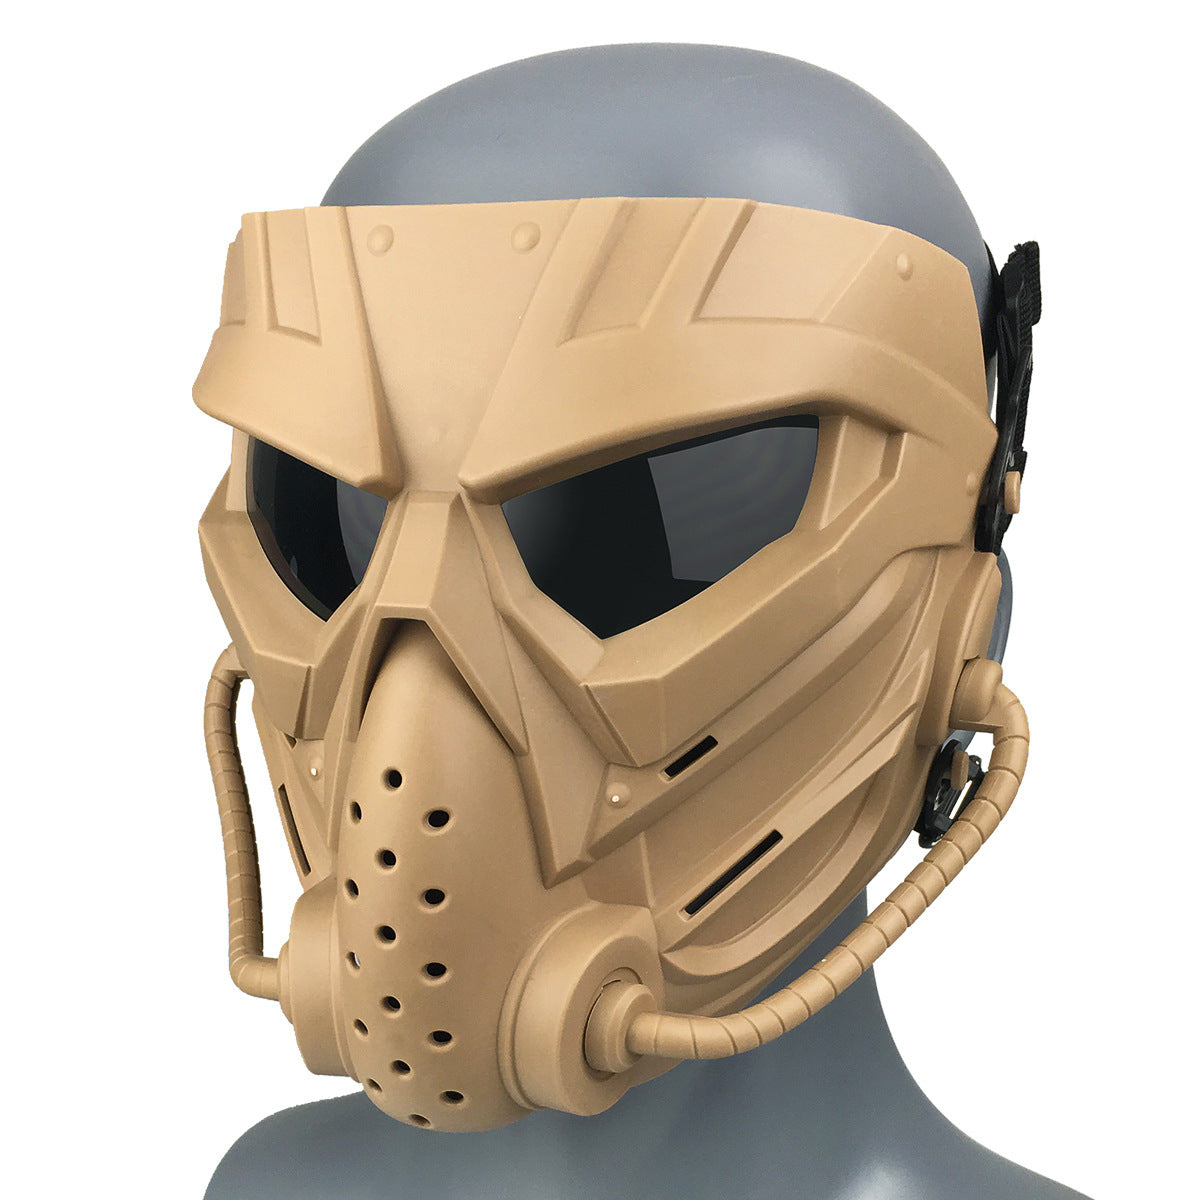 Tactical protective mask